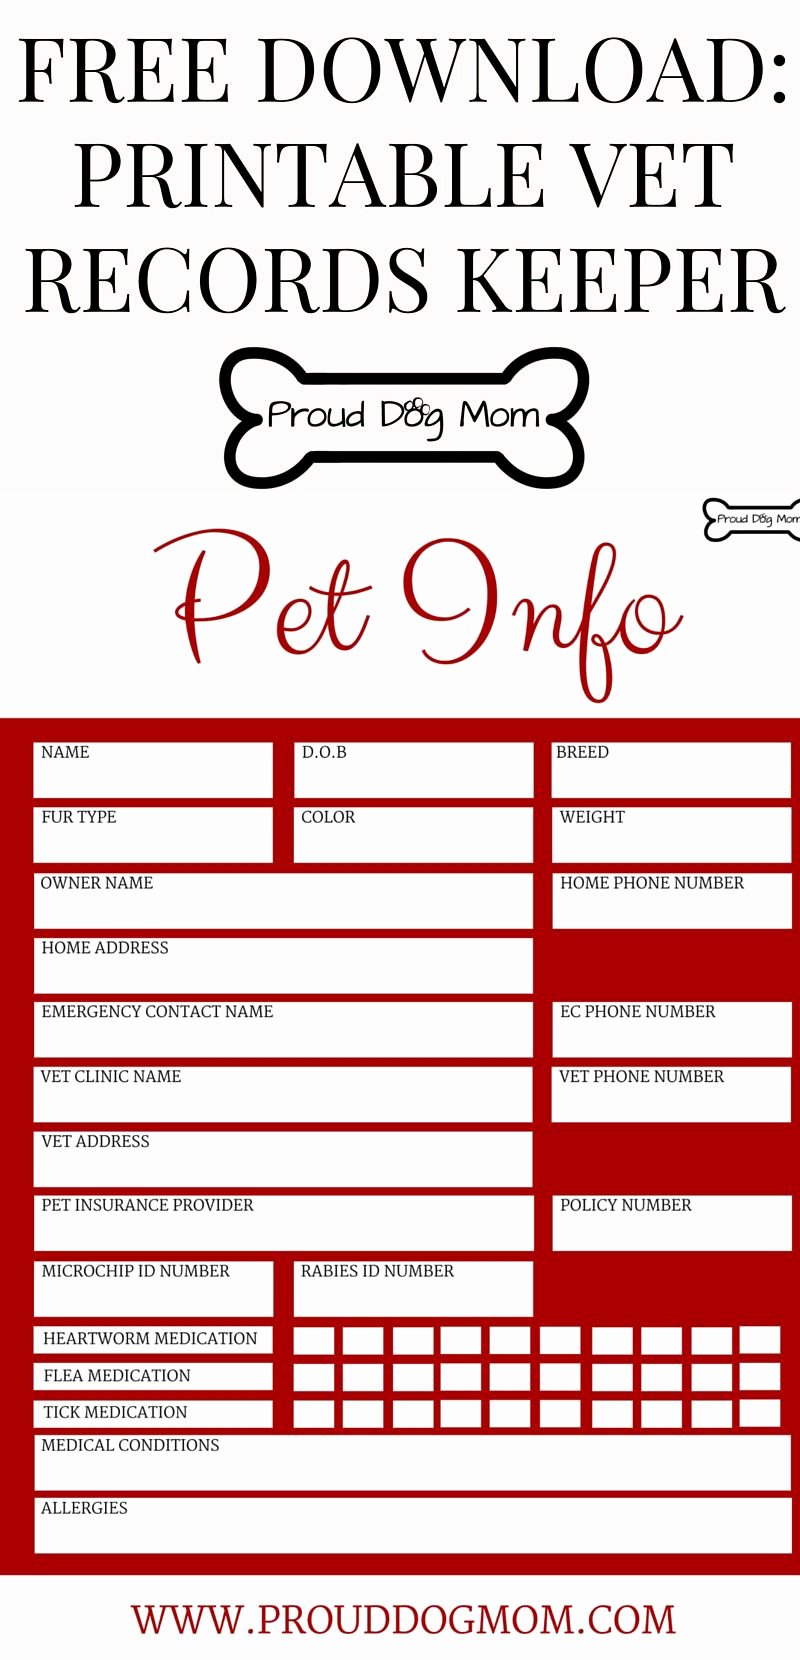 Veterinary Medical Records Templates Unique Free Download Printable Vet Records Keeper